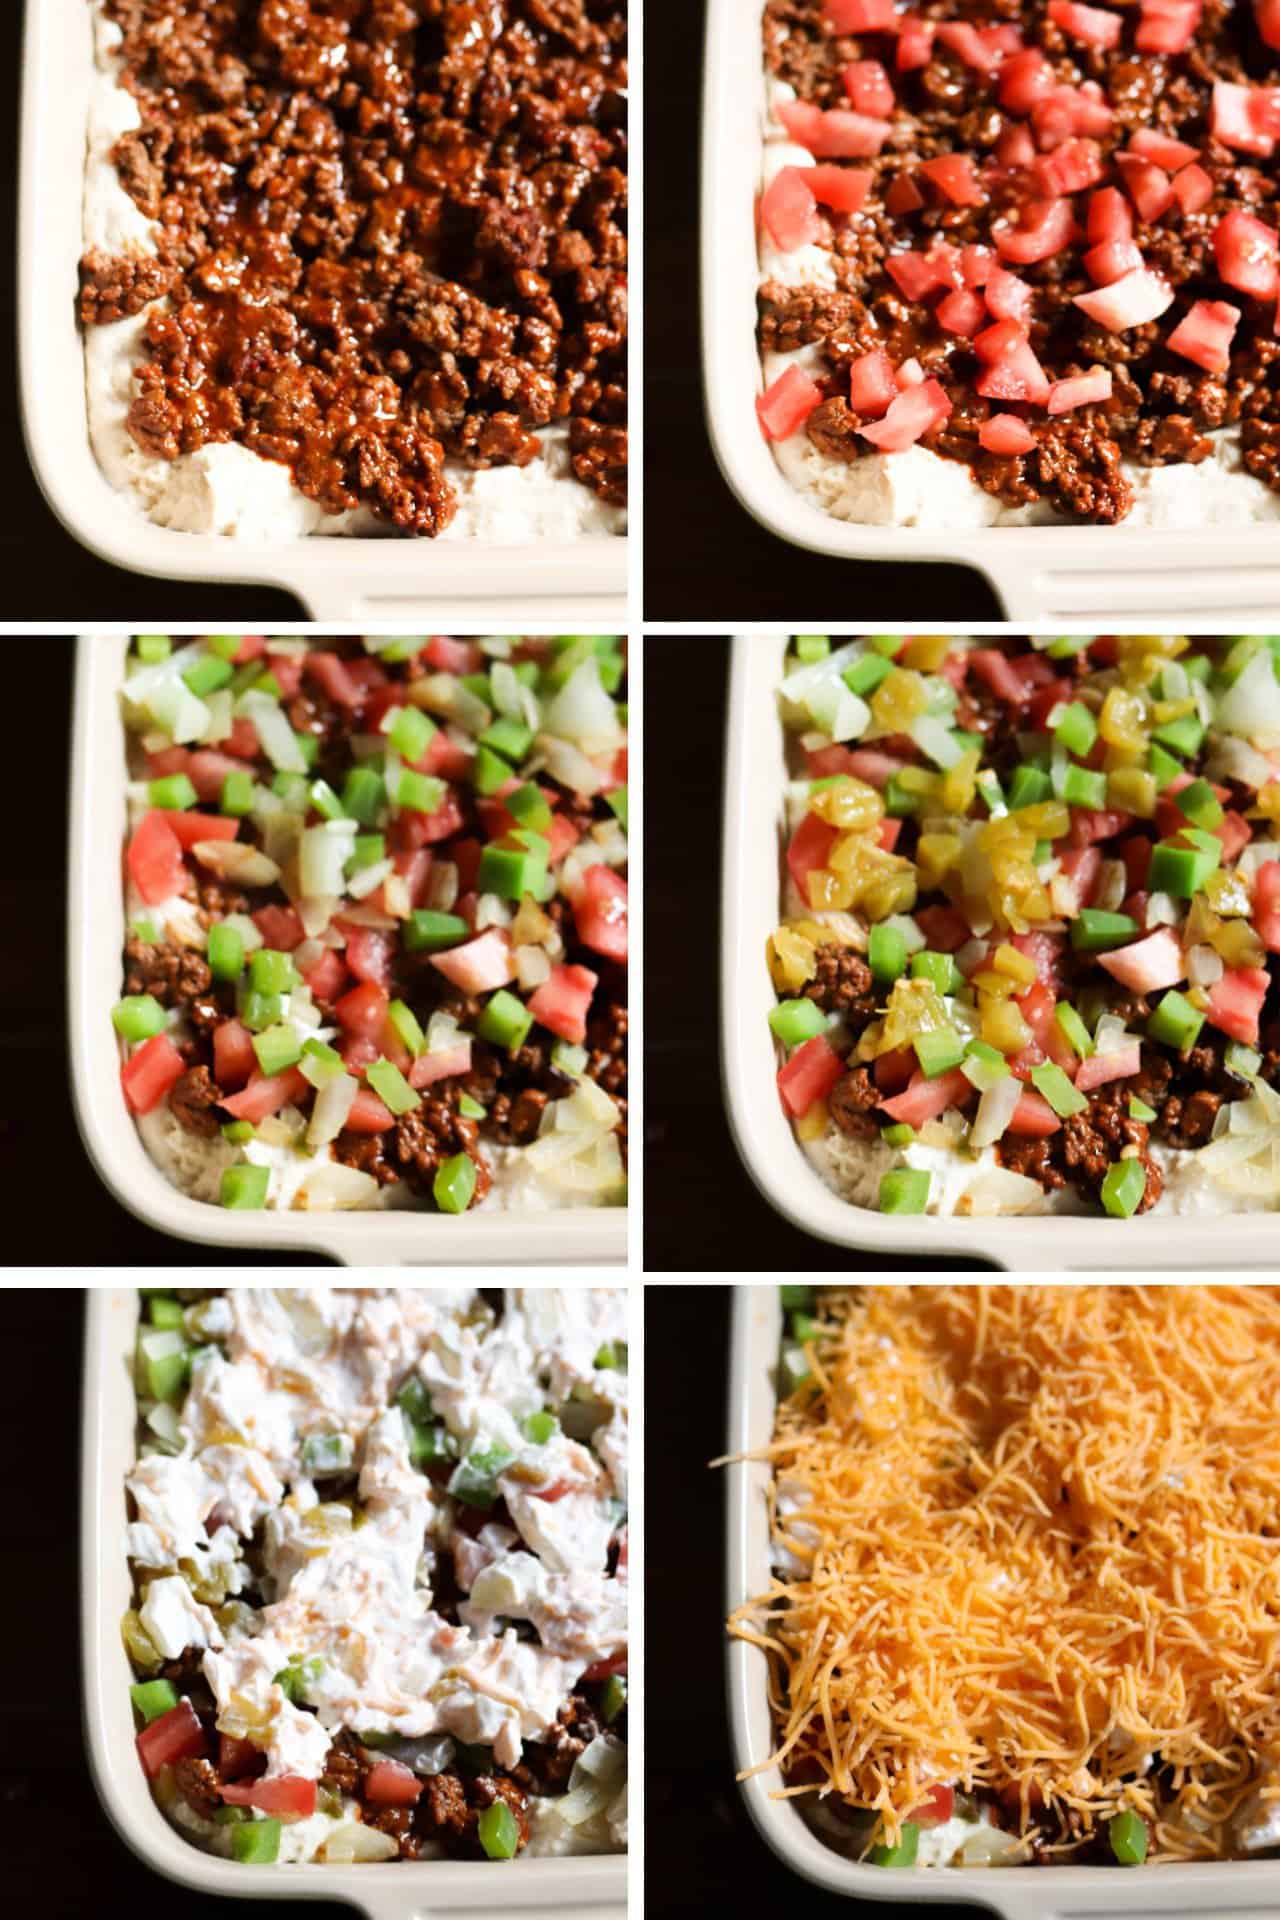 Layering stages for the John Wayne Casserole in a white casserole dish